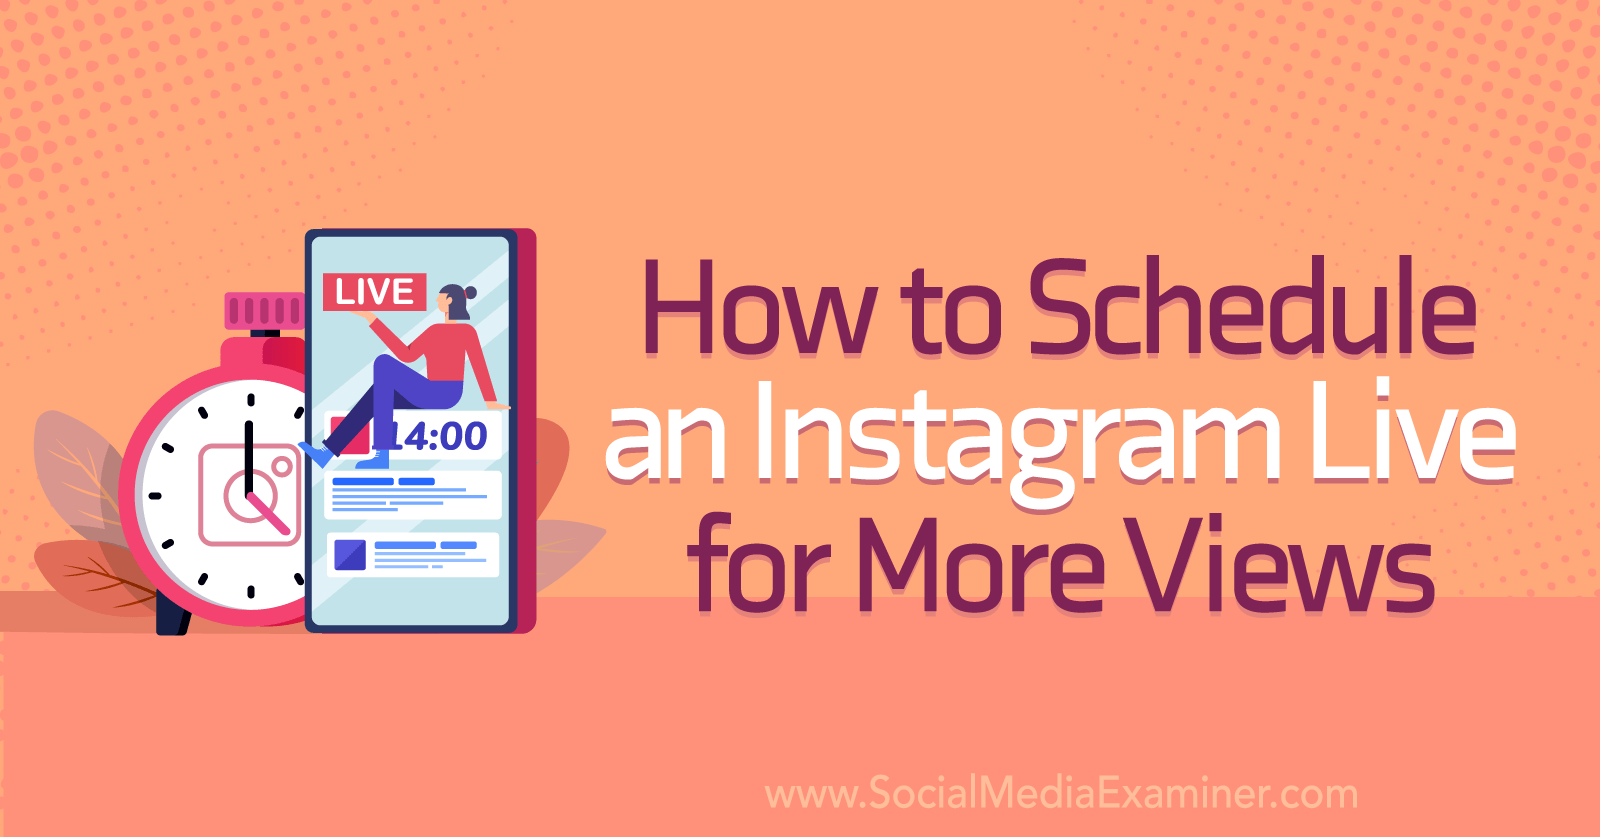 How to Schedule an Instagram Live for More Views on Social Media Examiner